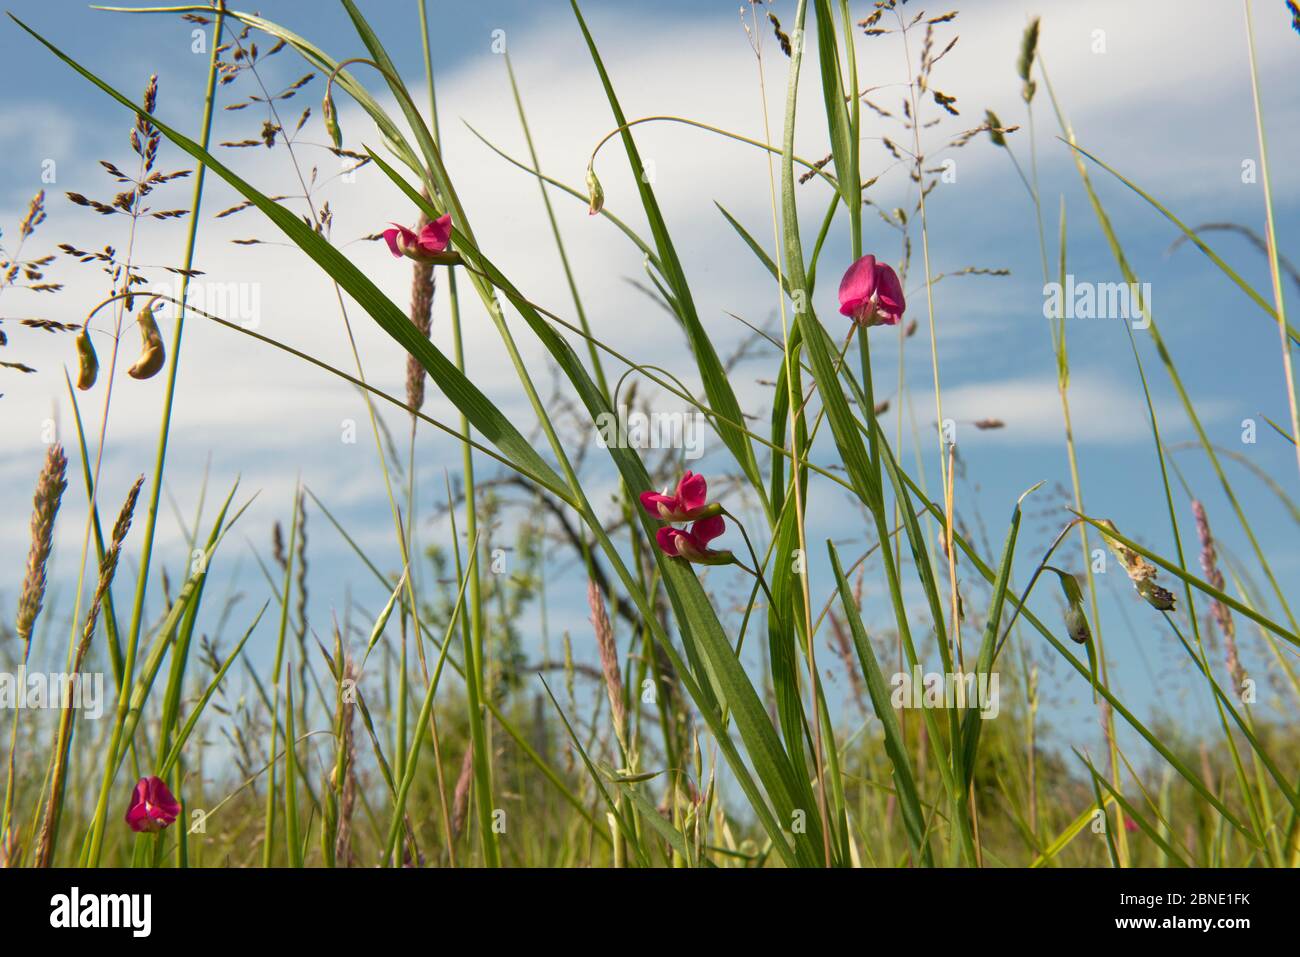 Grass-leaved vetchling (Lathyrus nissolia), flowering amongst Rough Meadow-grass (Poa trivialis), Worcestershire, England, UK, June. Stock Photo